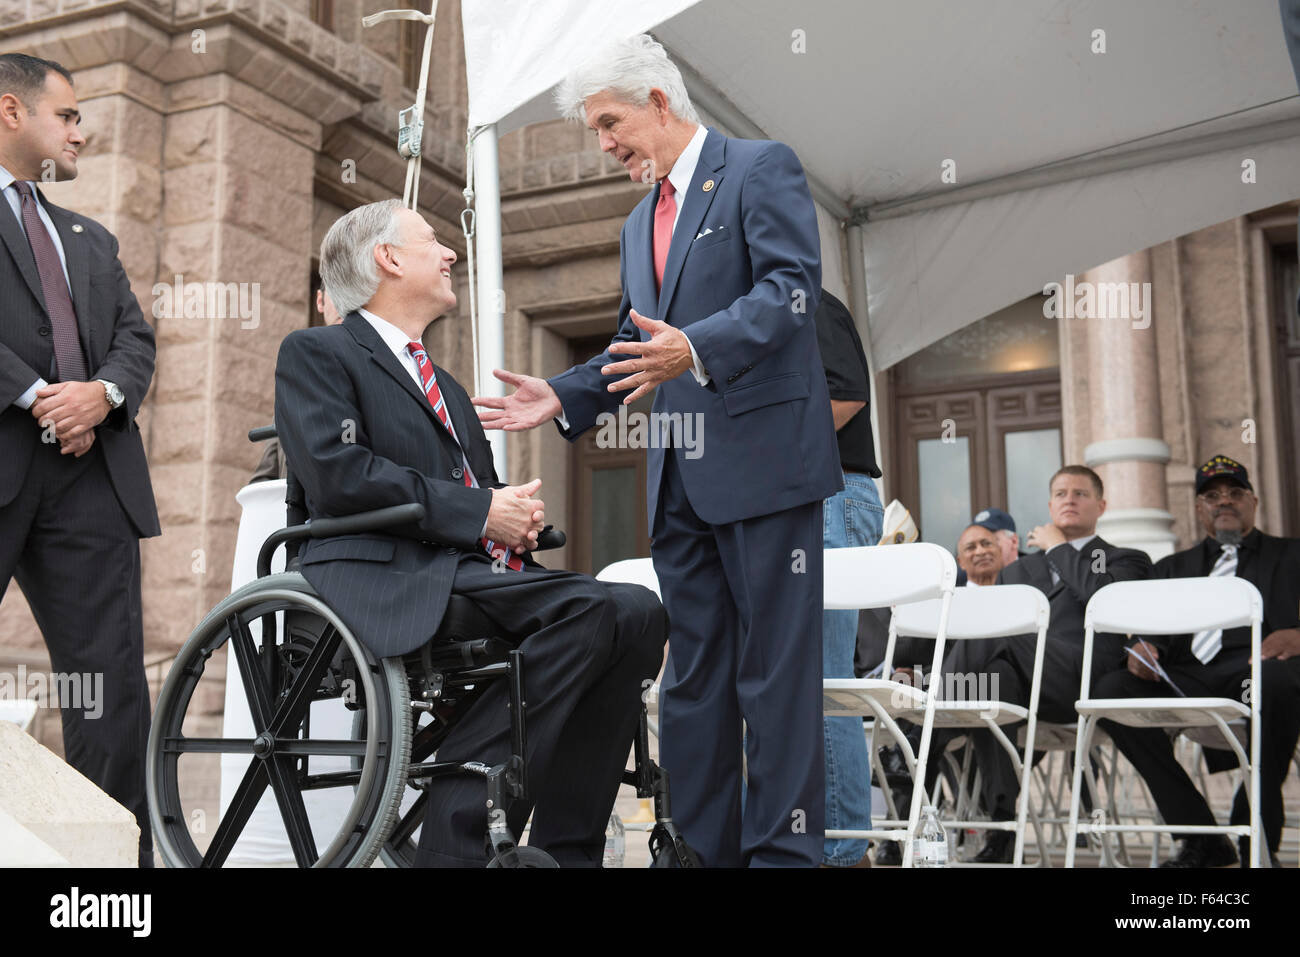 Austin, Texas USA November 11, 2015: Texas Gov. Greg Abbott (l) speaks with Congressman Roger Williams of Texas' 25th District during the Veteran's Day parade up Congress Avenue and ceremony at the Texas Capitol. Several thousand Texans lined Congress Avenue to witness military heroes, marching bands and floats in the annual parade. Credit:  Bob Daemmrich/Alamy Live News Stock Photo